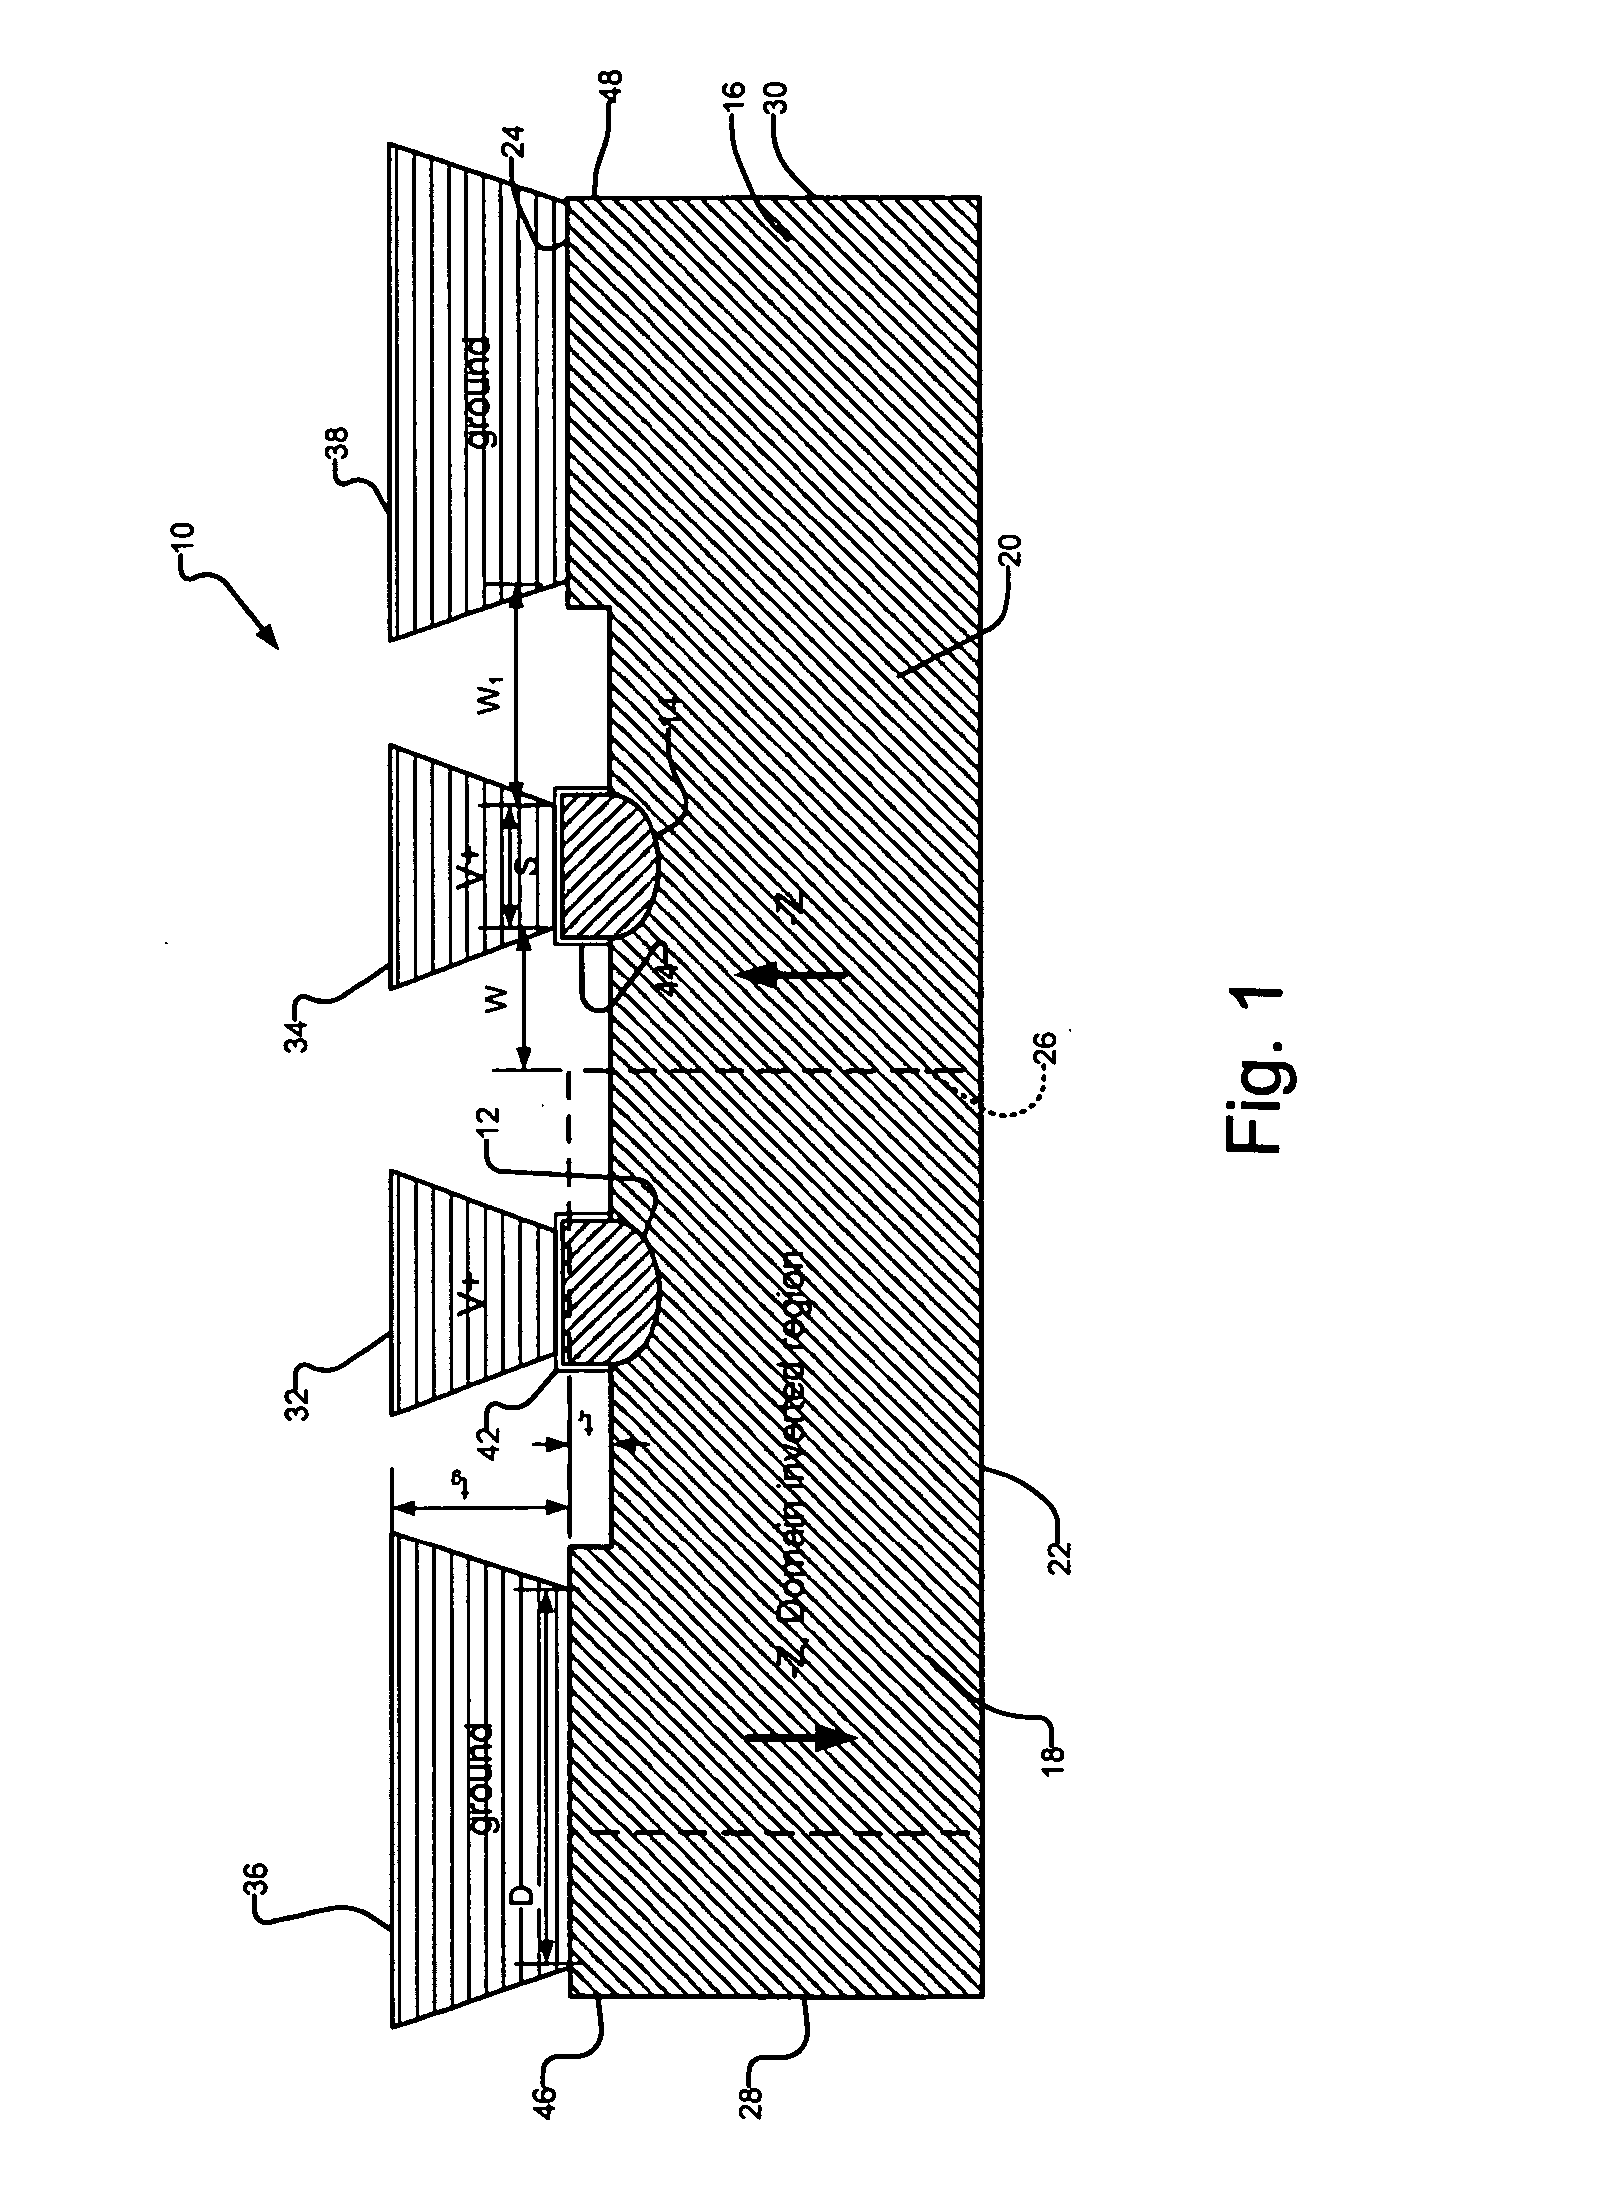 Optical modulator with coupled coplanar strip electrode and domain inversion